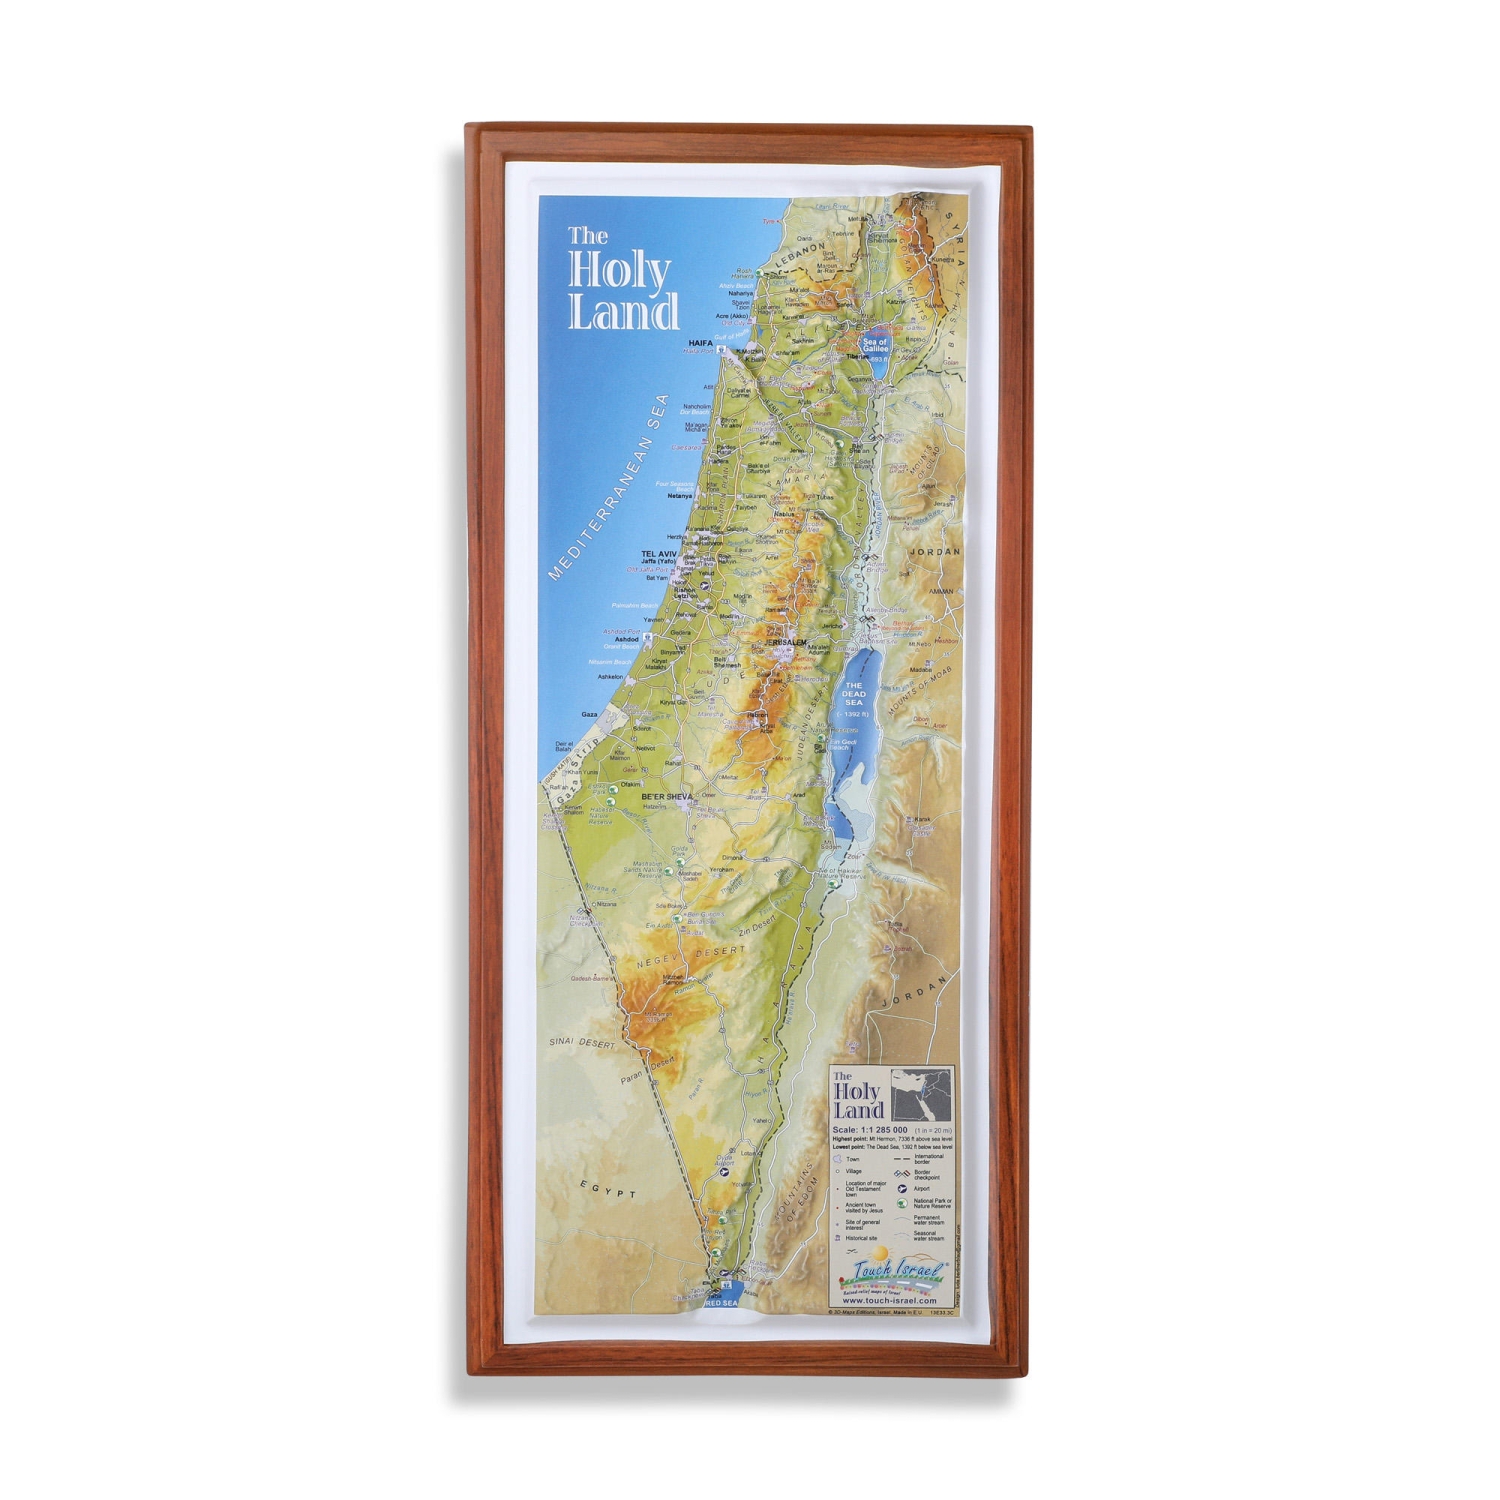 The Holy Land Topographical Map  - 1